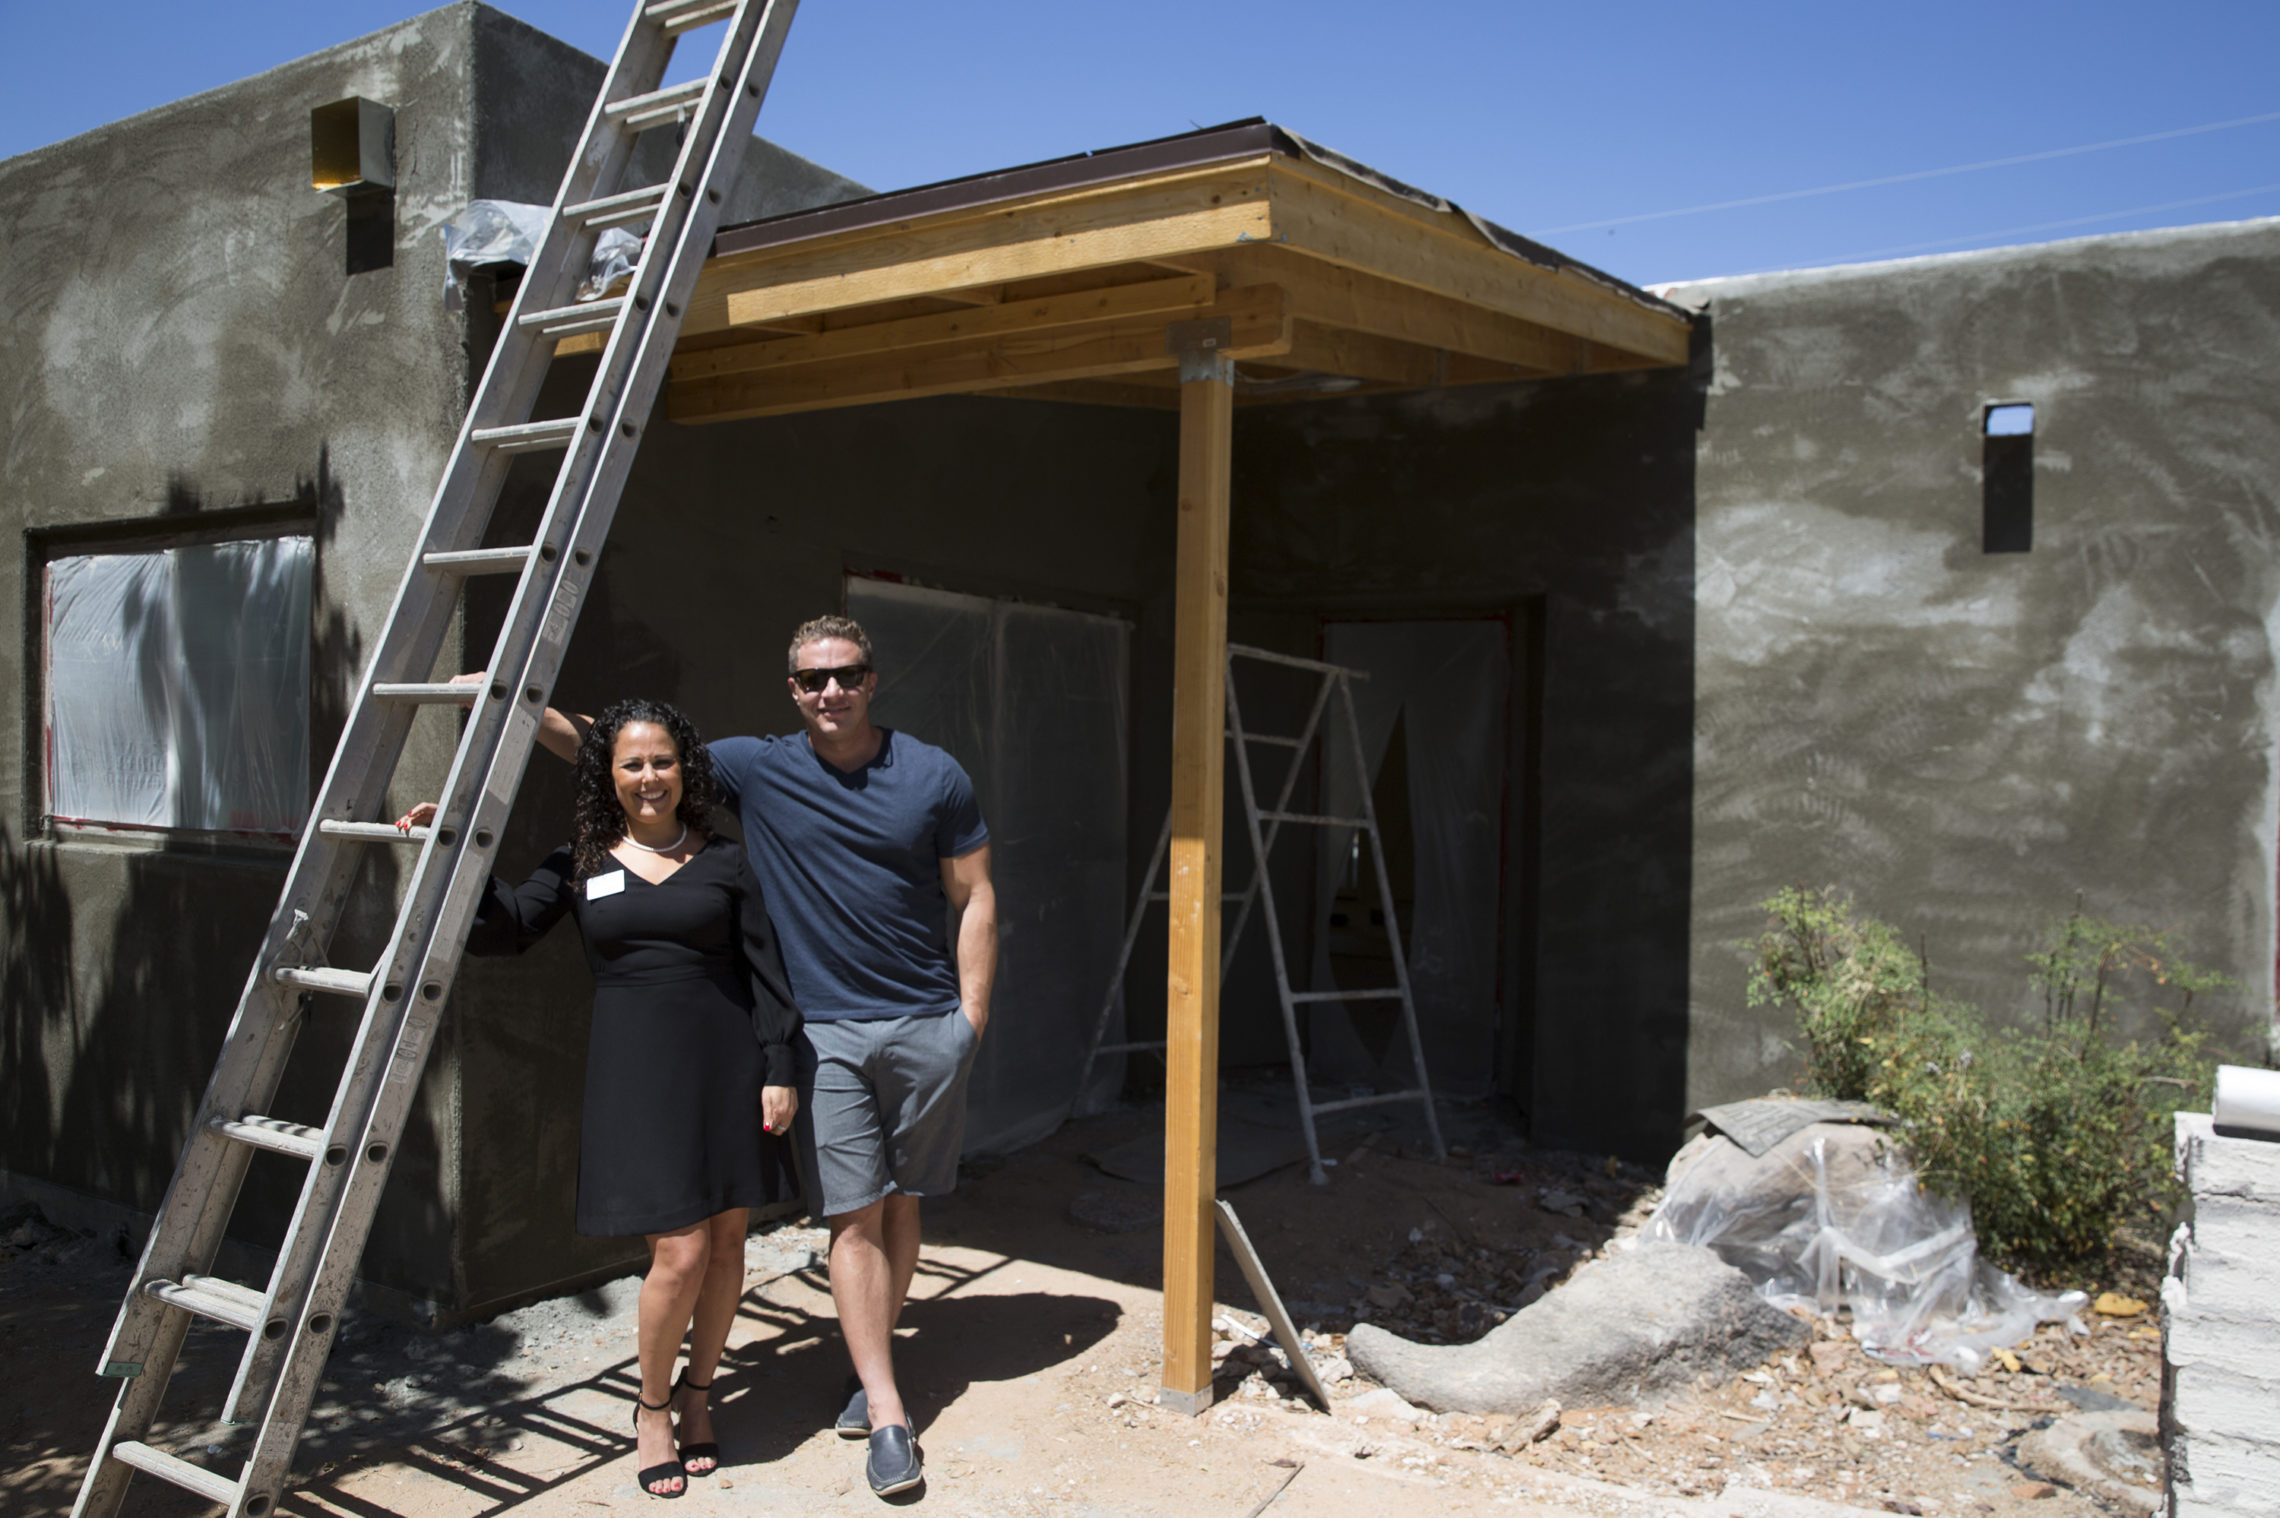 Realtor Lauren Rosin and investor Brad Pickett work together flipping homes in Phoenix. More than 8,500 homes sold in the Phoenix metropolitan area last year were flips, more than anywhere else in the country. CREDIT: CAITLYN O'HARA